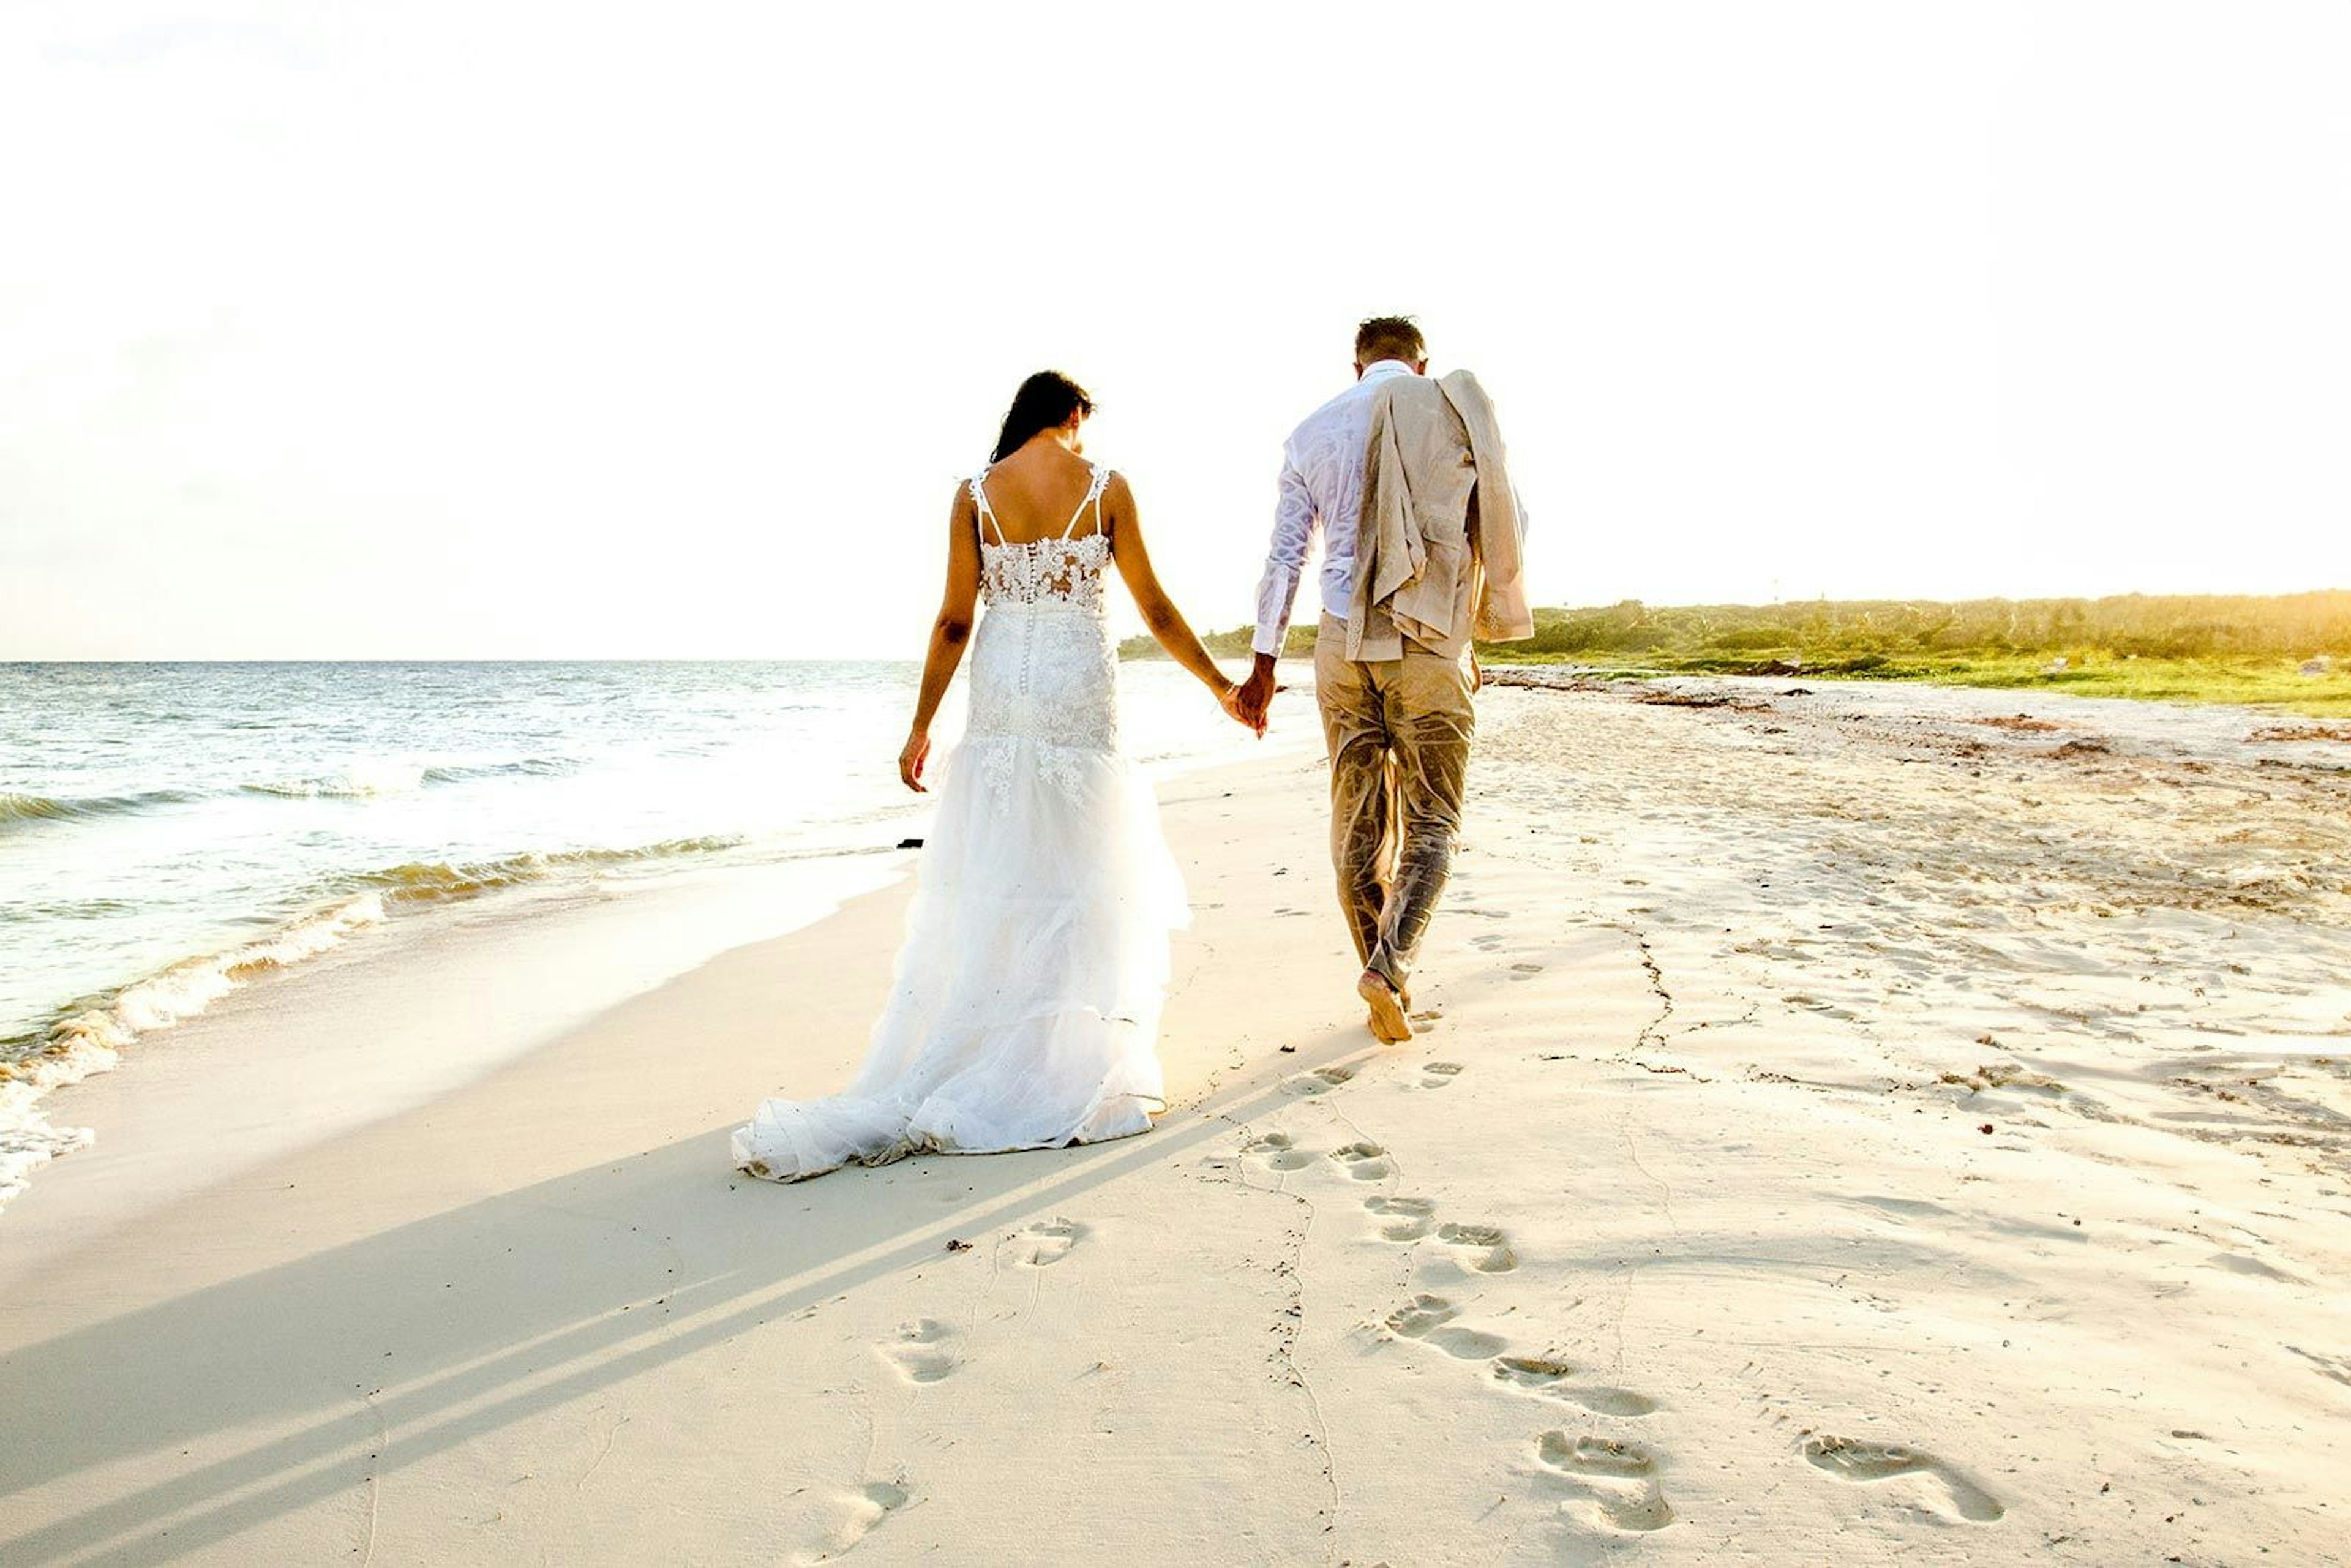 A couple strolls hand in hand along the beach at Secrets Tulum, leaving footprints in the sand as the setting sun casts a warm glow over their tranquil walk, the bride's elegant dress trailing behind.